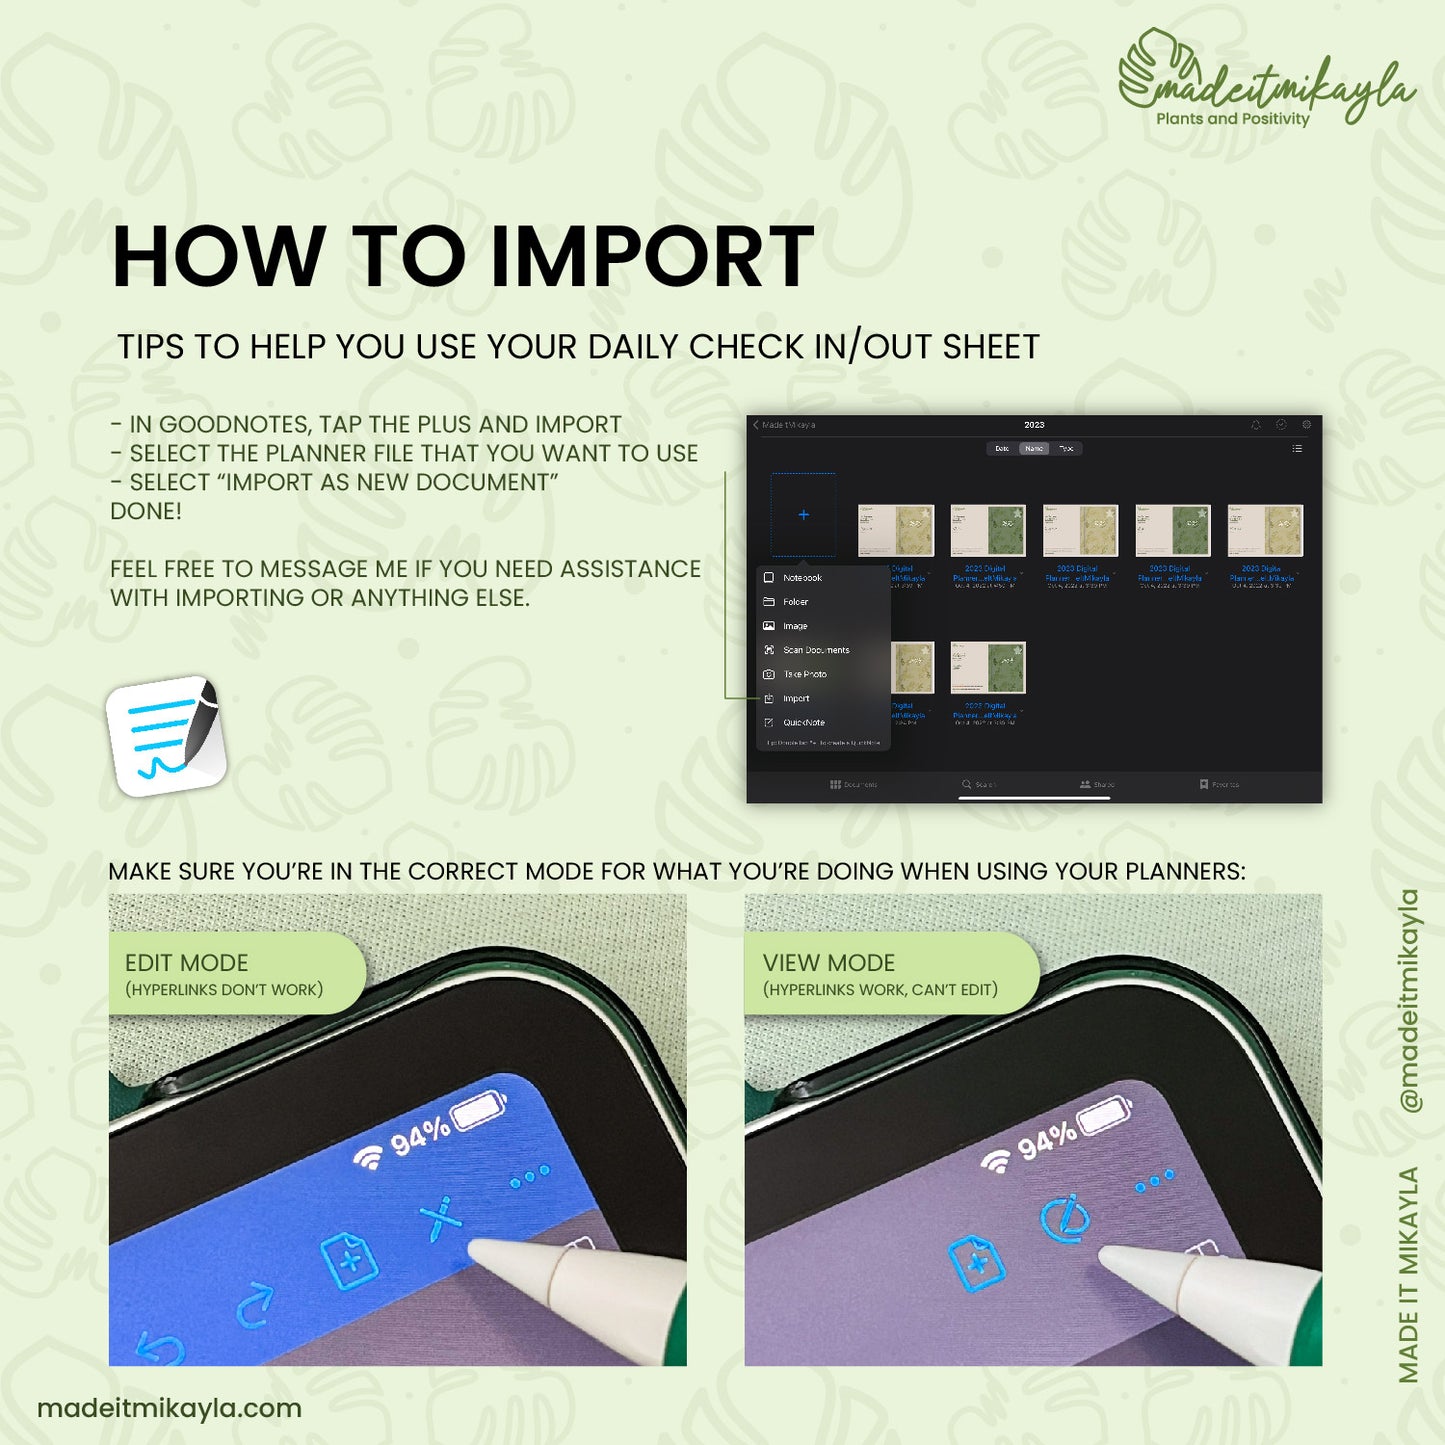 How to Import Digital Products | MadeItMikayla